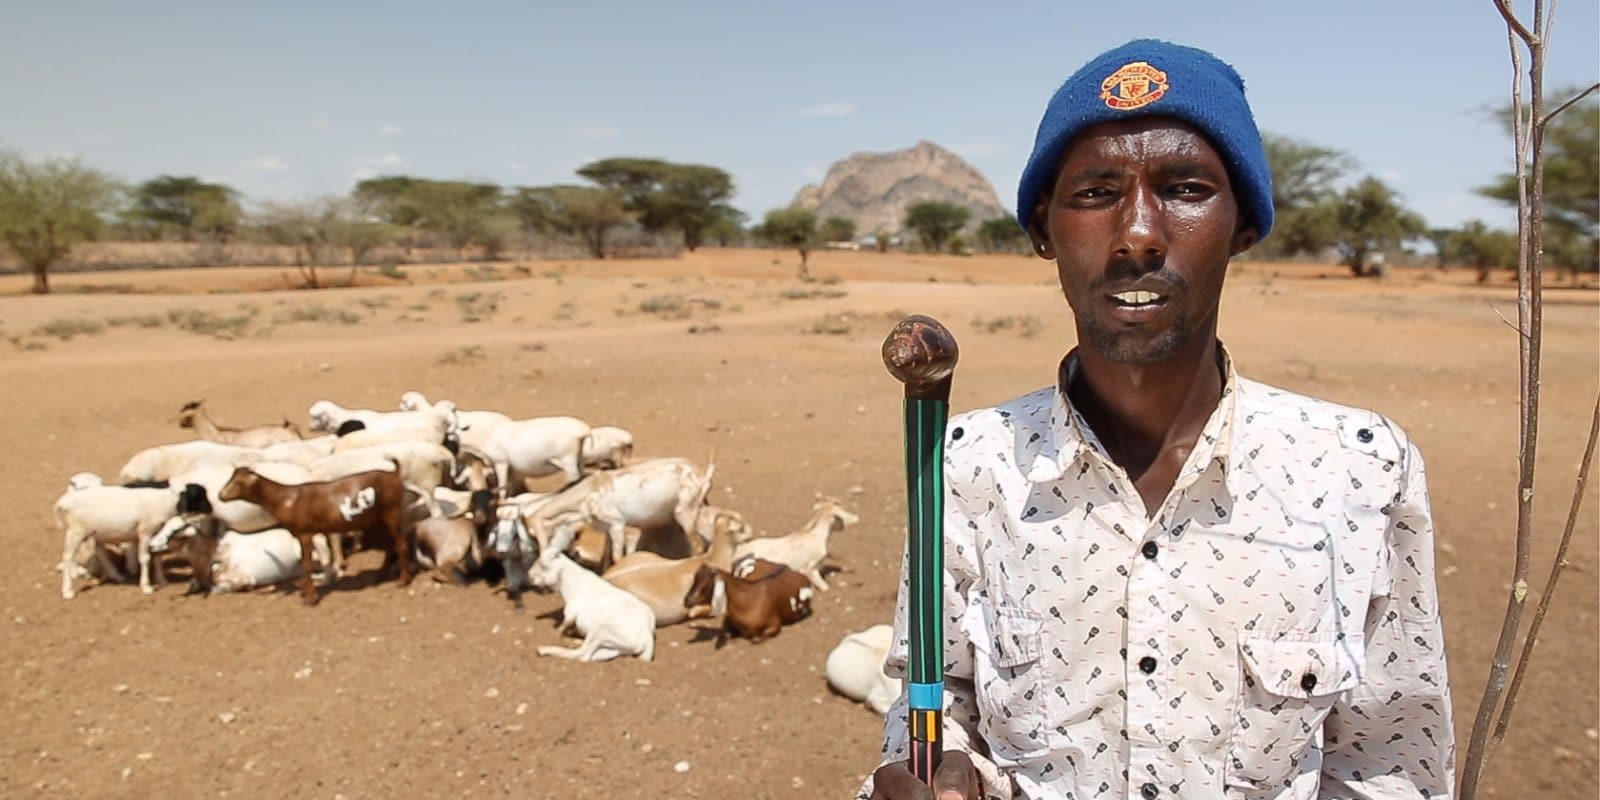 A pastoralist in Marsait, Kenya, with some of his livestock.